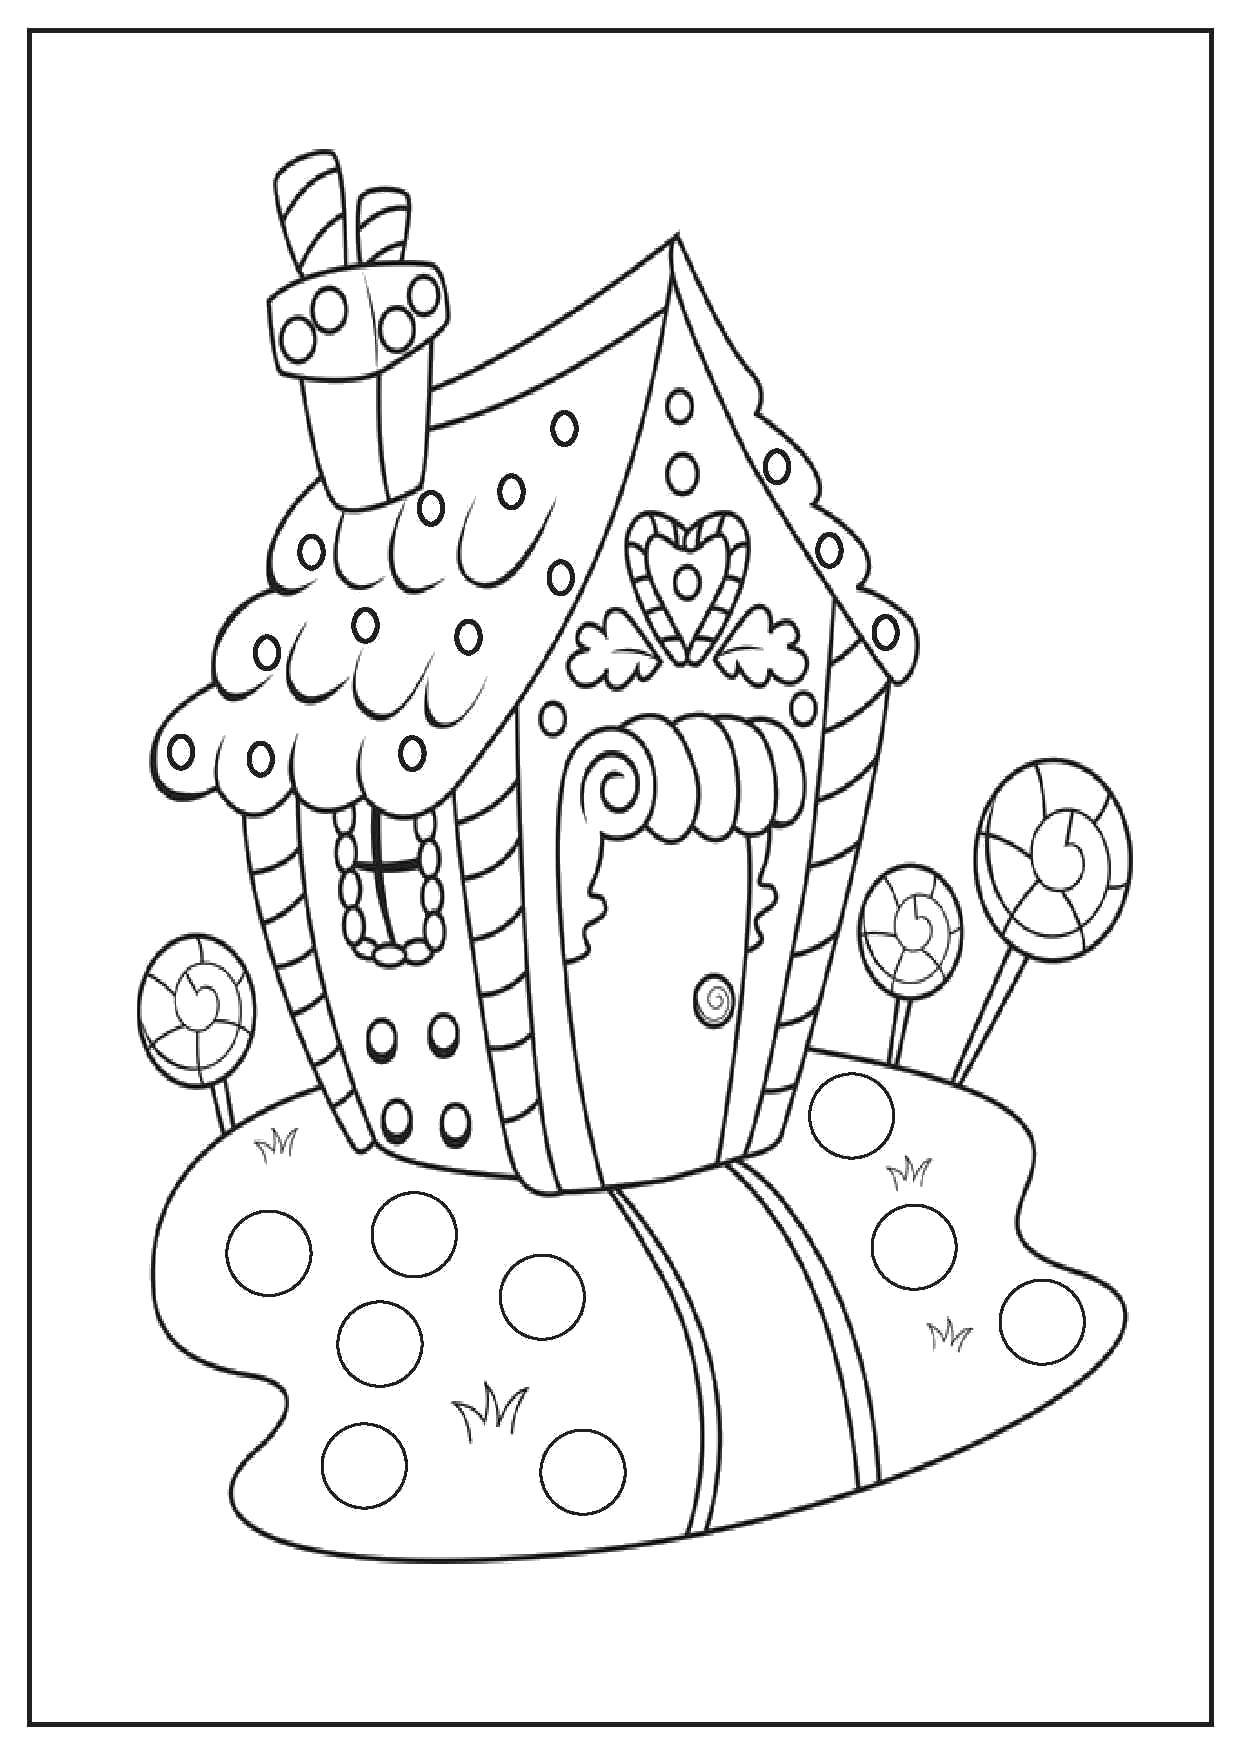 Coloring Gingerbread house. Category Christmas. Tags:  Christmas, Christmas toy.